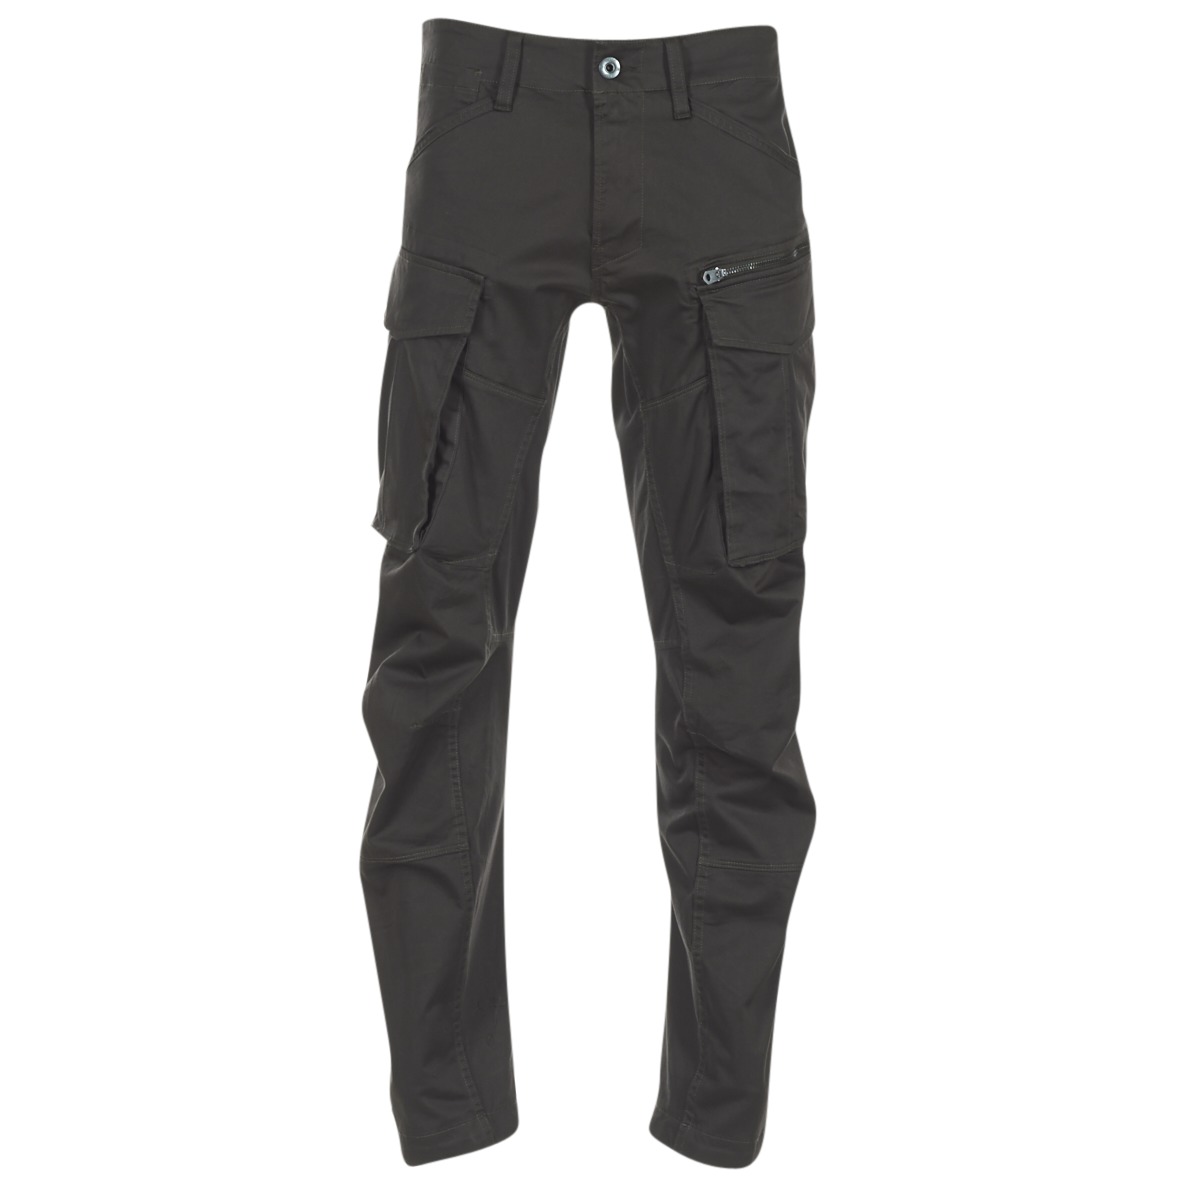 G-Star RAW Trousers JUDEE in camel